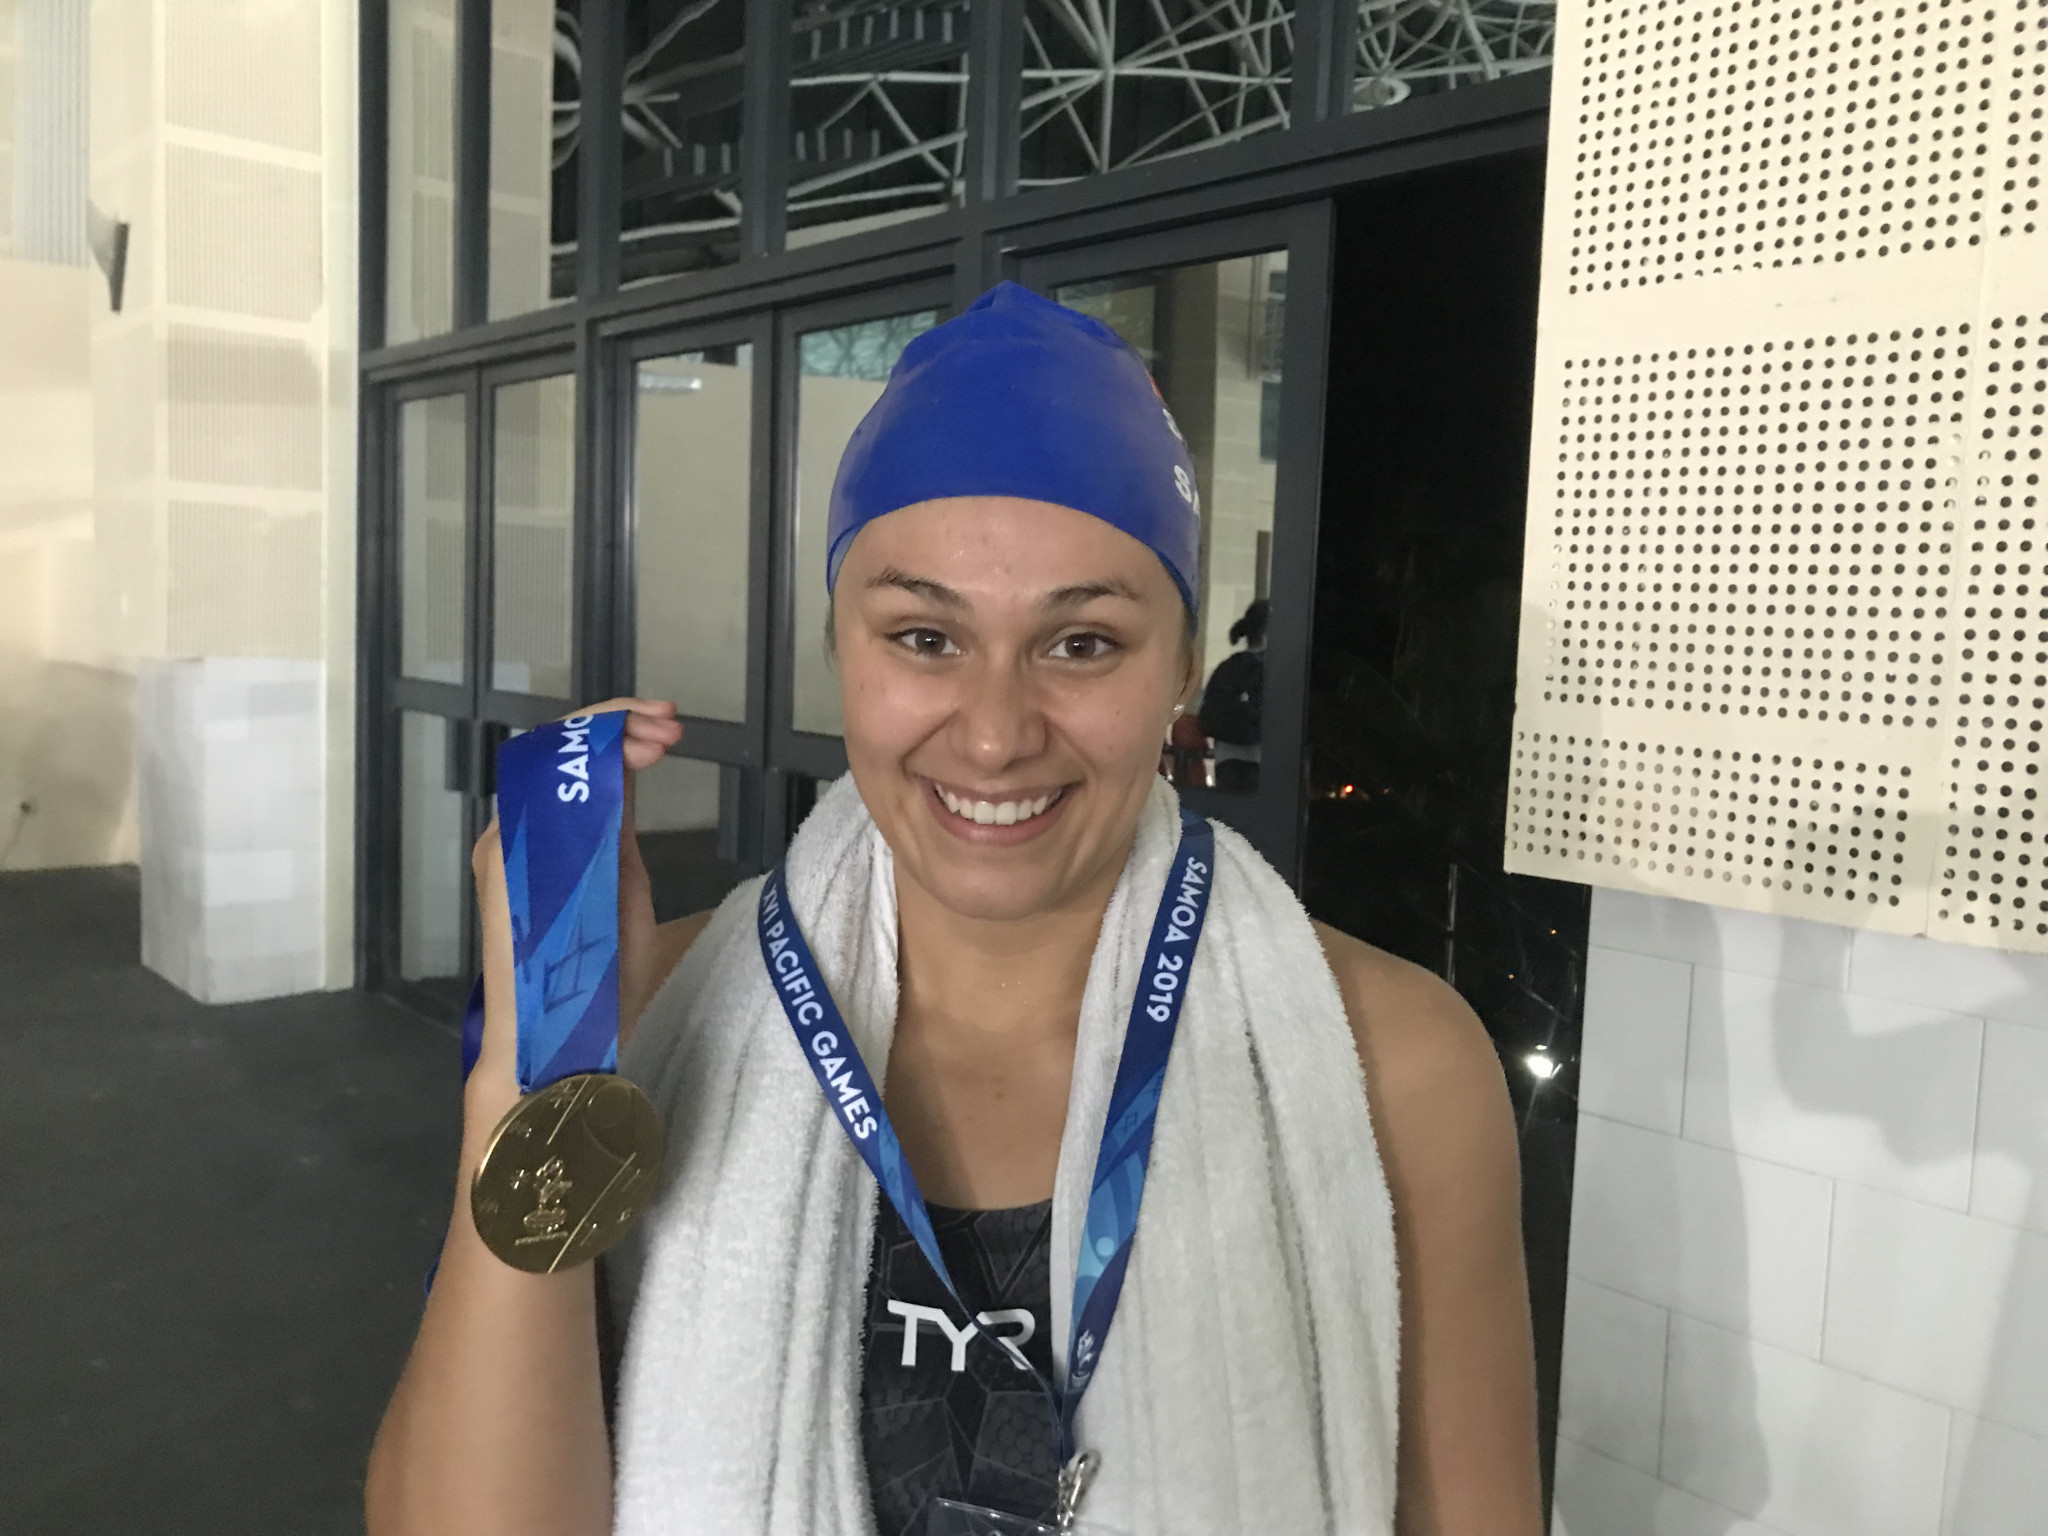 Lauren Sale celebrates victory in the 200m women's backstroke to become Samoa's first female swimming Pacific Games champion on a memorable night in the pool for the hosts ©ITG